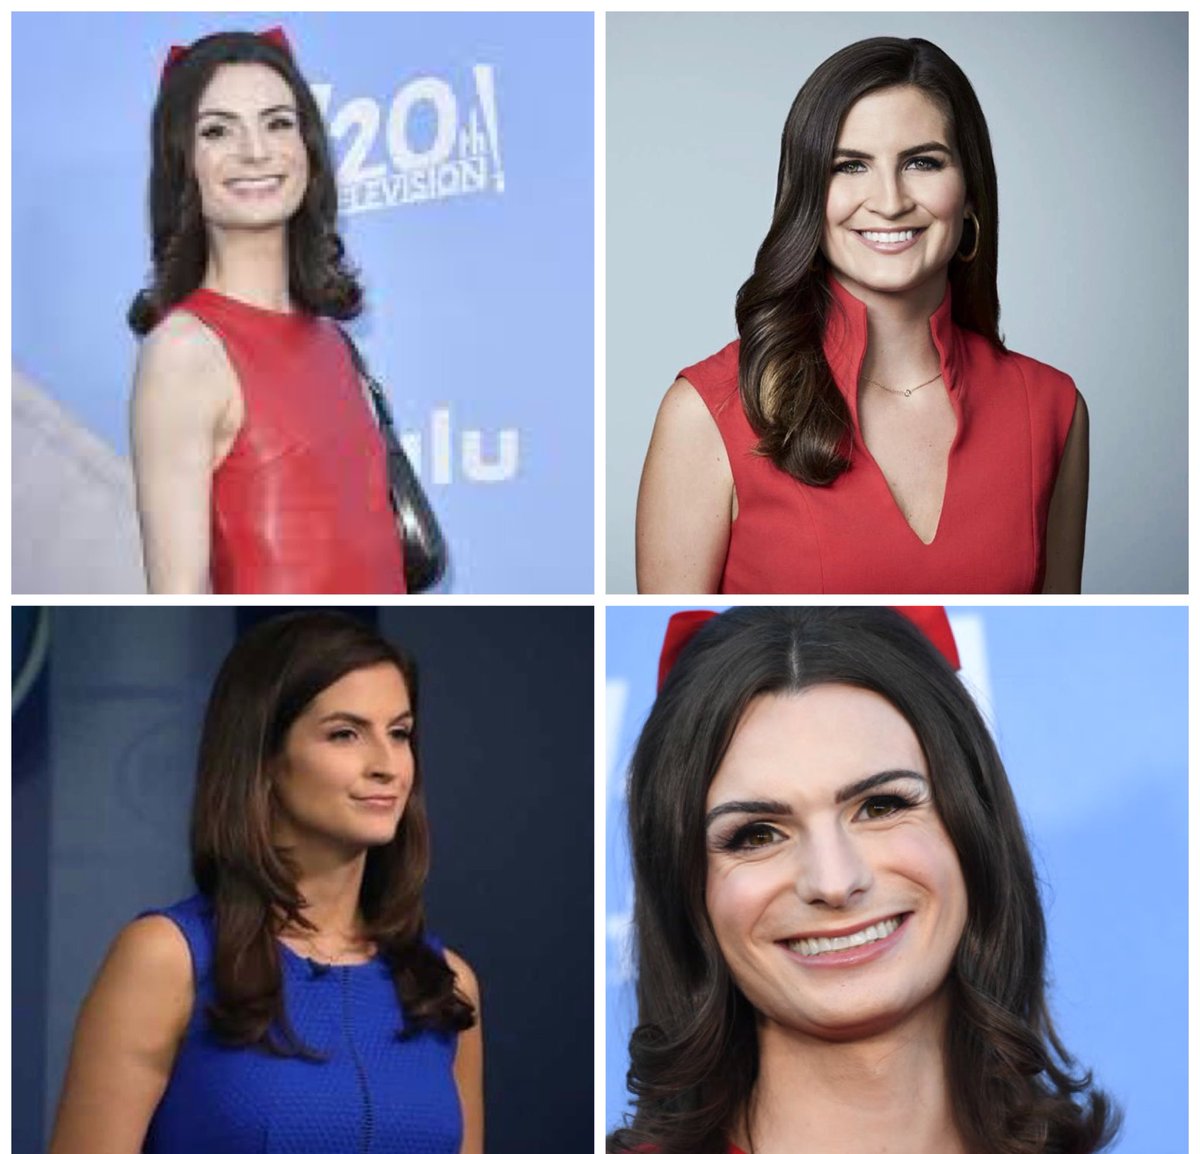 Has anyone seen Dylan Mulvaney and CNNs Kaitlan Collins in the same room at the same time?????? 
😂😂